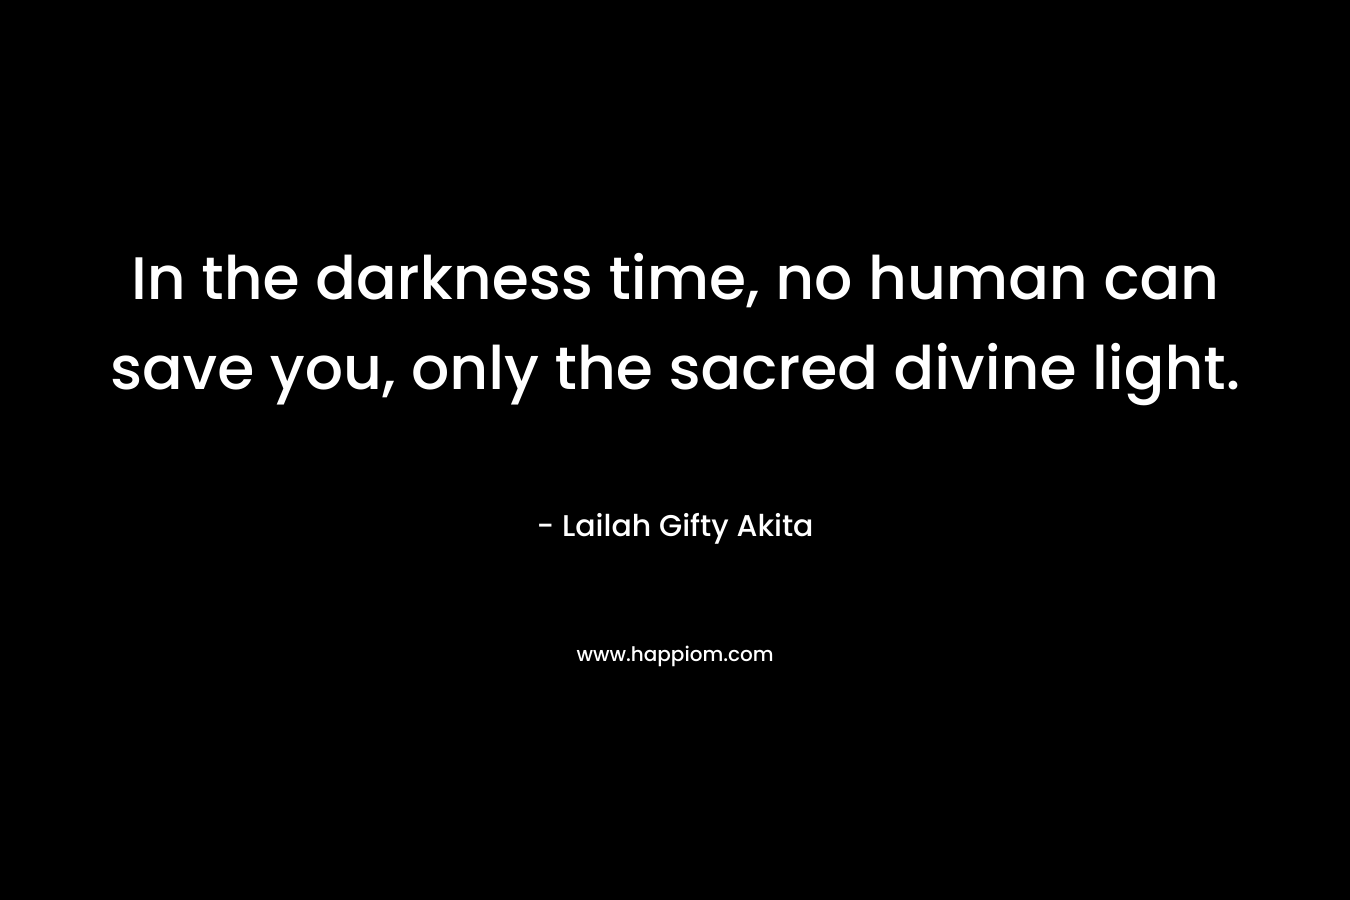 In the darkness time, no human can save you, only the sacred divine light.